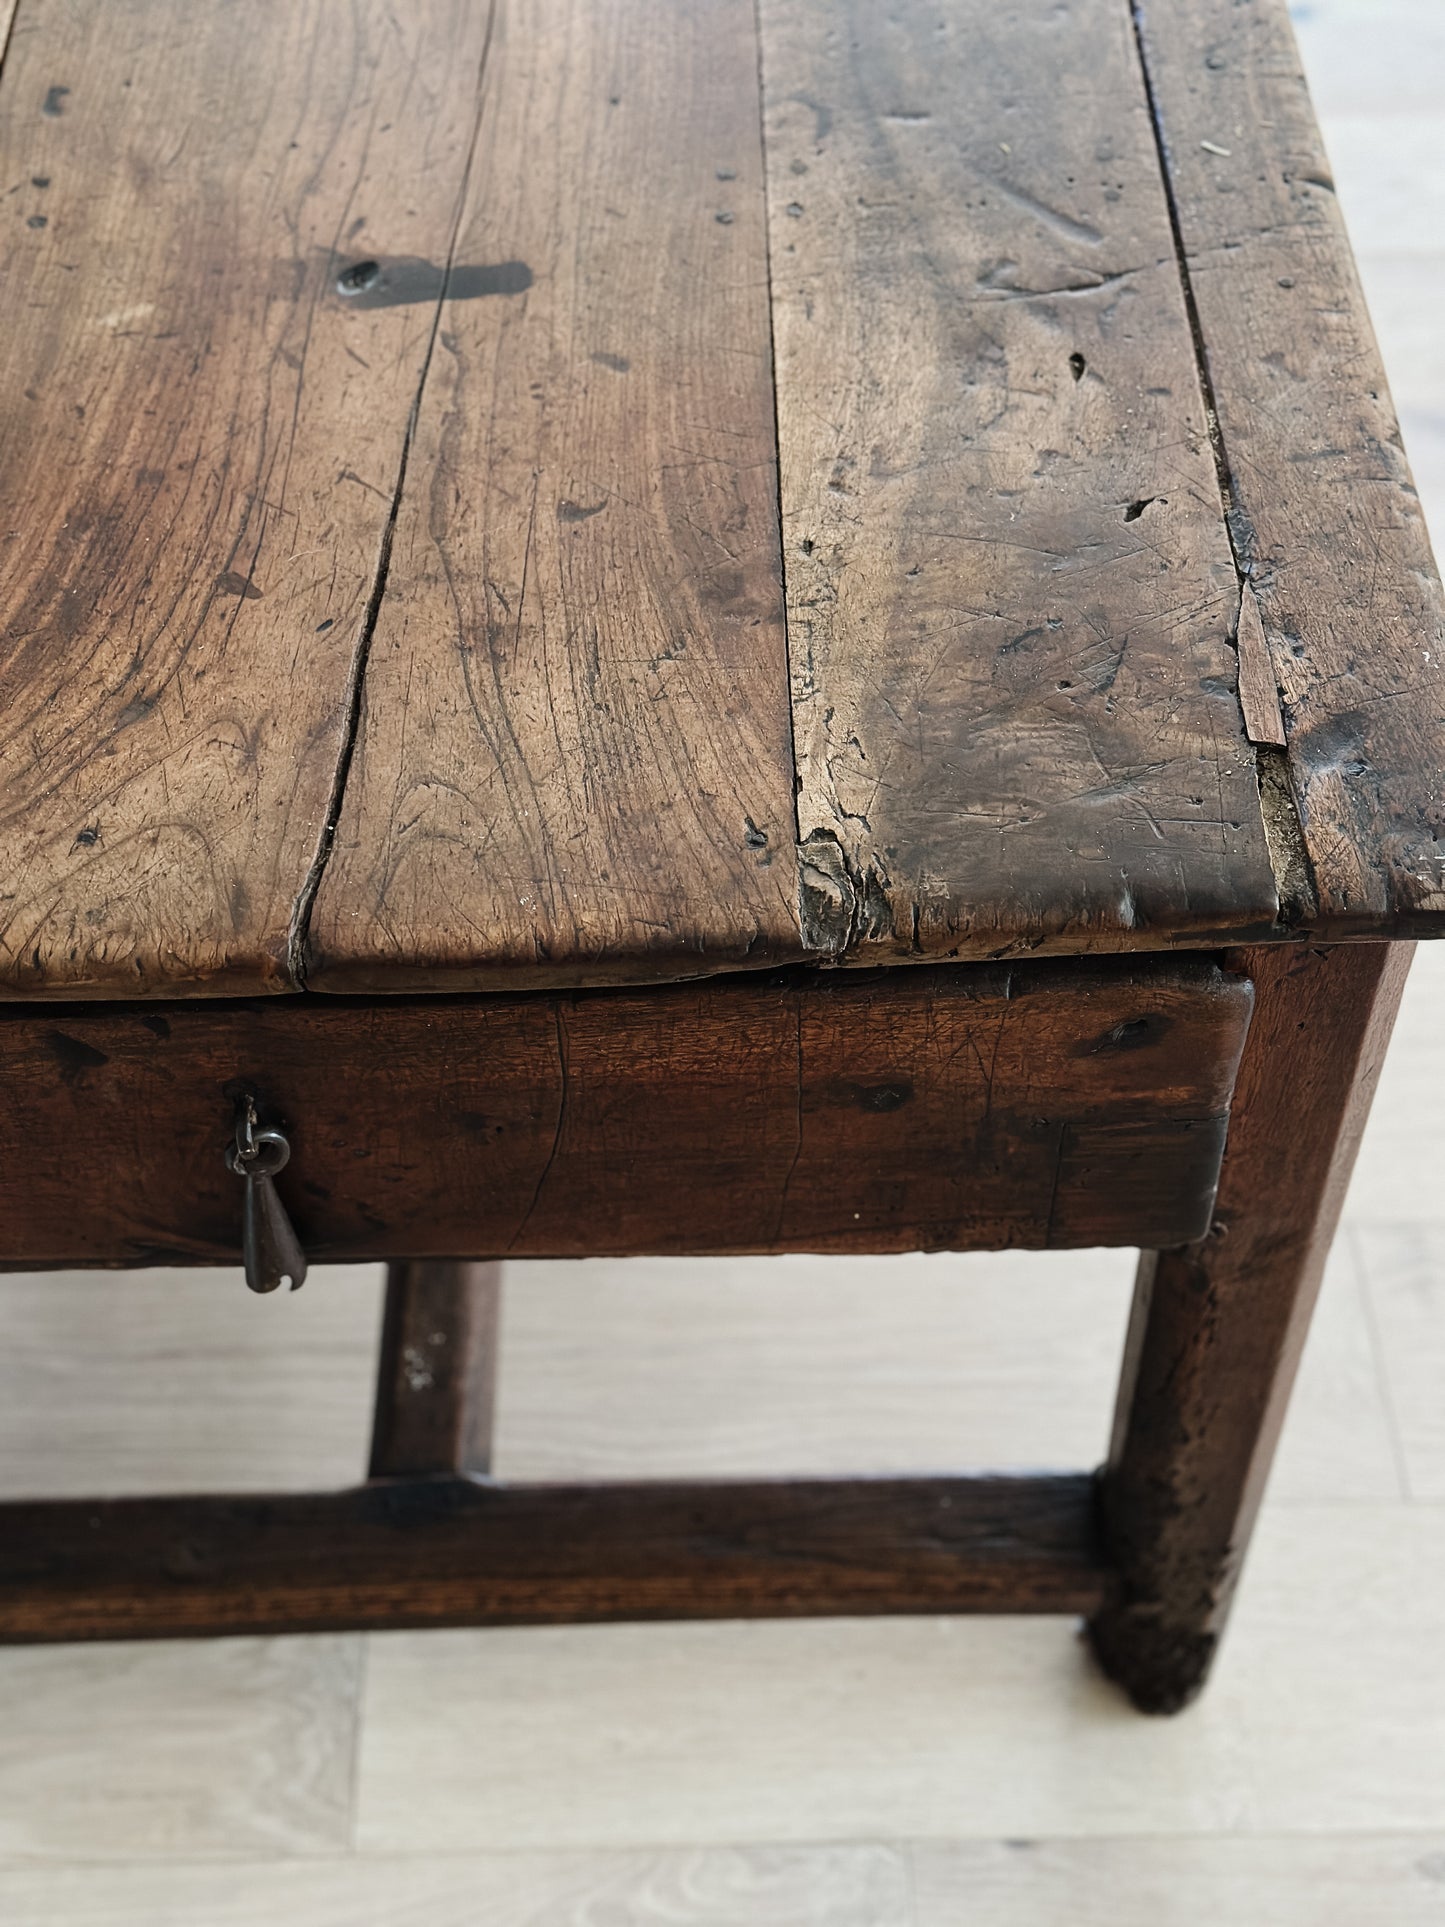 Antique 18th Century Spanish Refectory Table